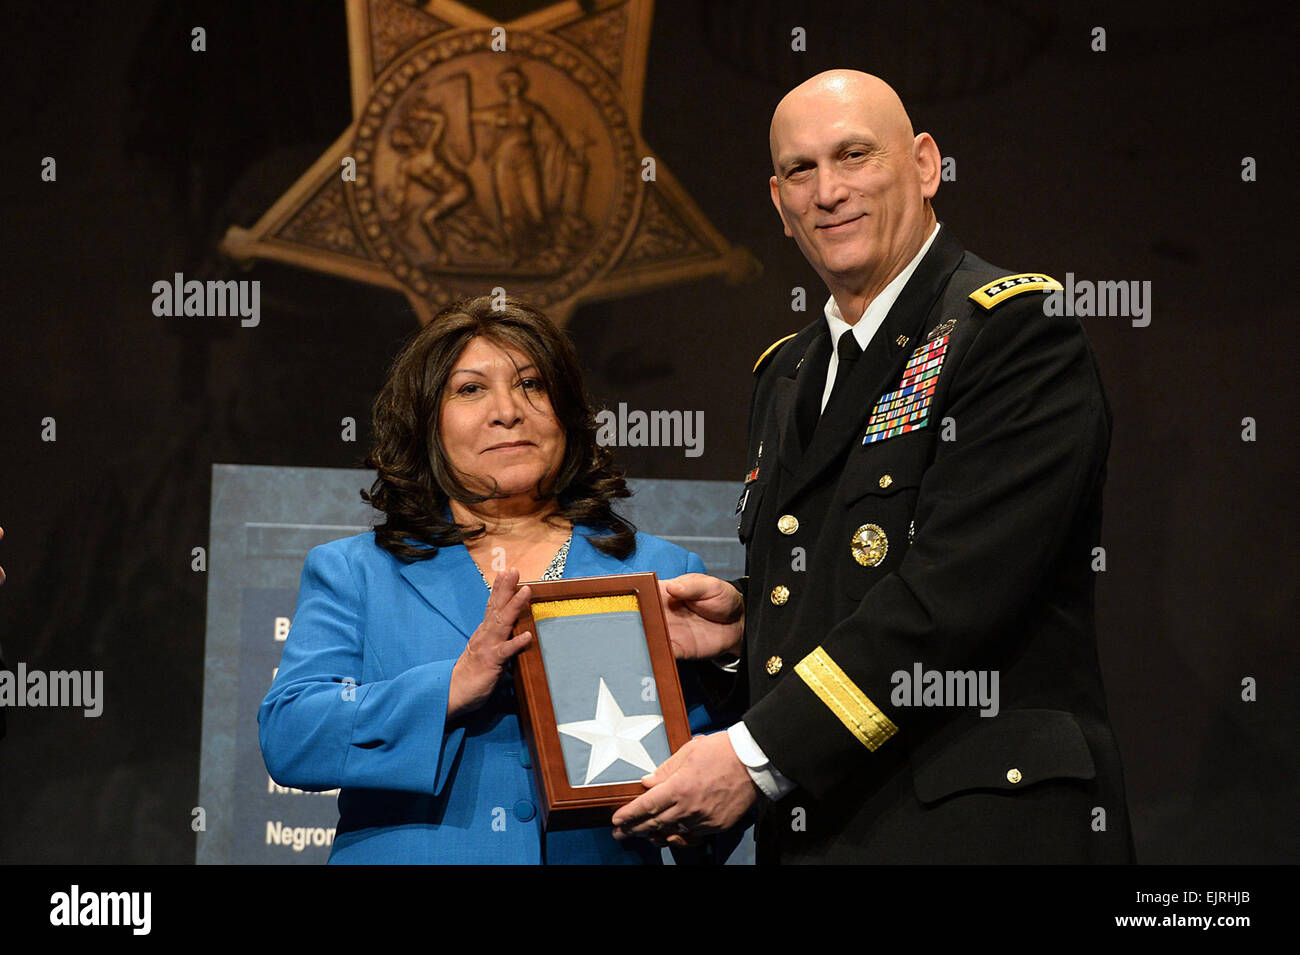 Chief of Staff of the Army, Gen. Raymond T. Odierno presents the Medal of Honor Flag to Miriam Adams, on behalf of her uncle, Pvt. Joe Gandara, one of 24 Army veterans honored during the Valor 24 Hall of Heroes Induction ceremony, held at the Pentagon, Washington D.C., March 19, 2014.  Mr. Leroy Council Stock Photo